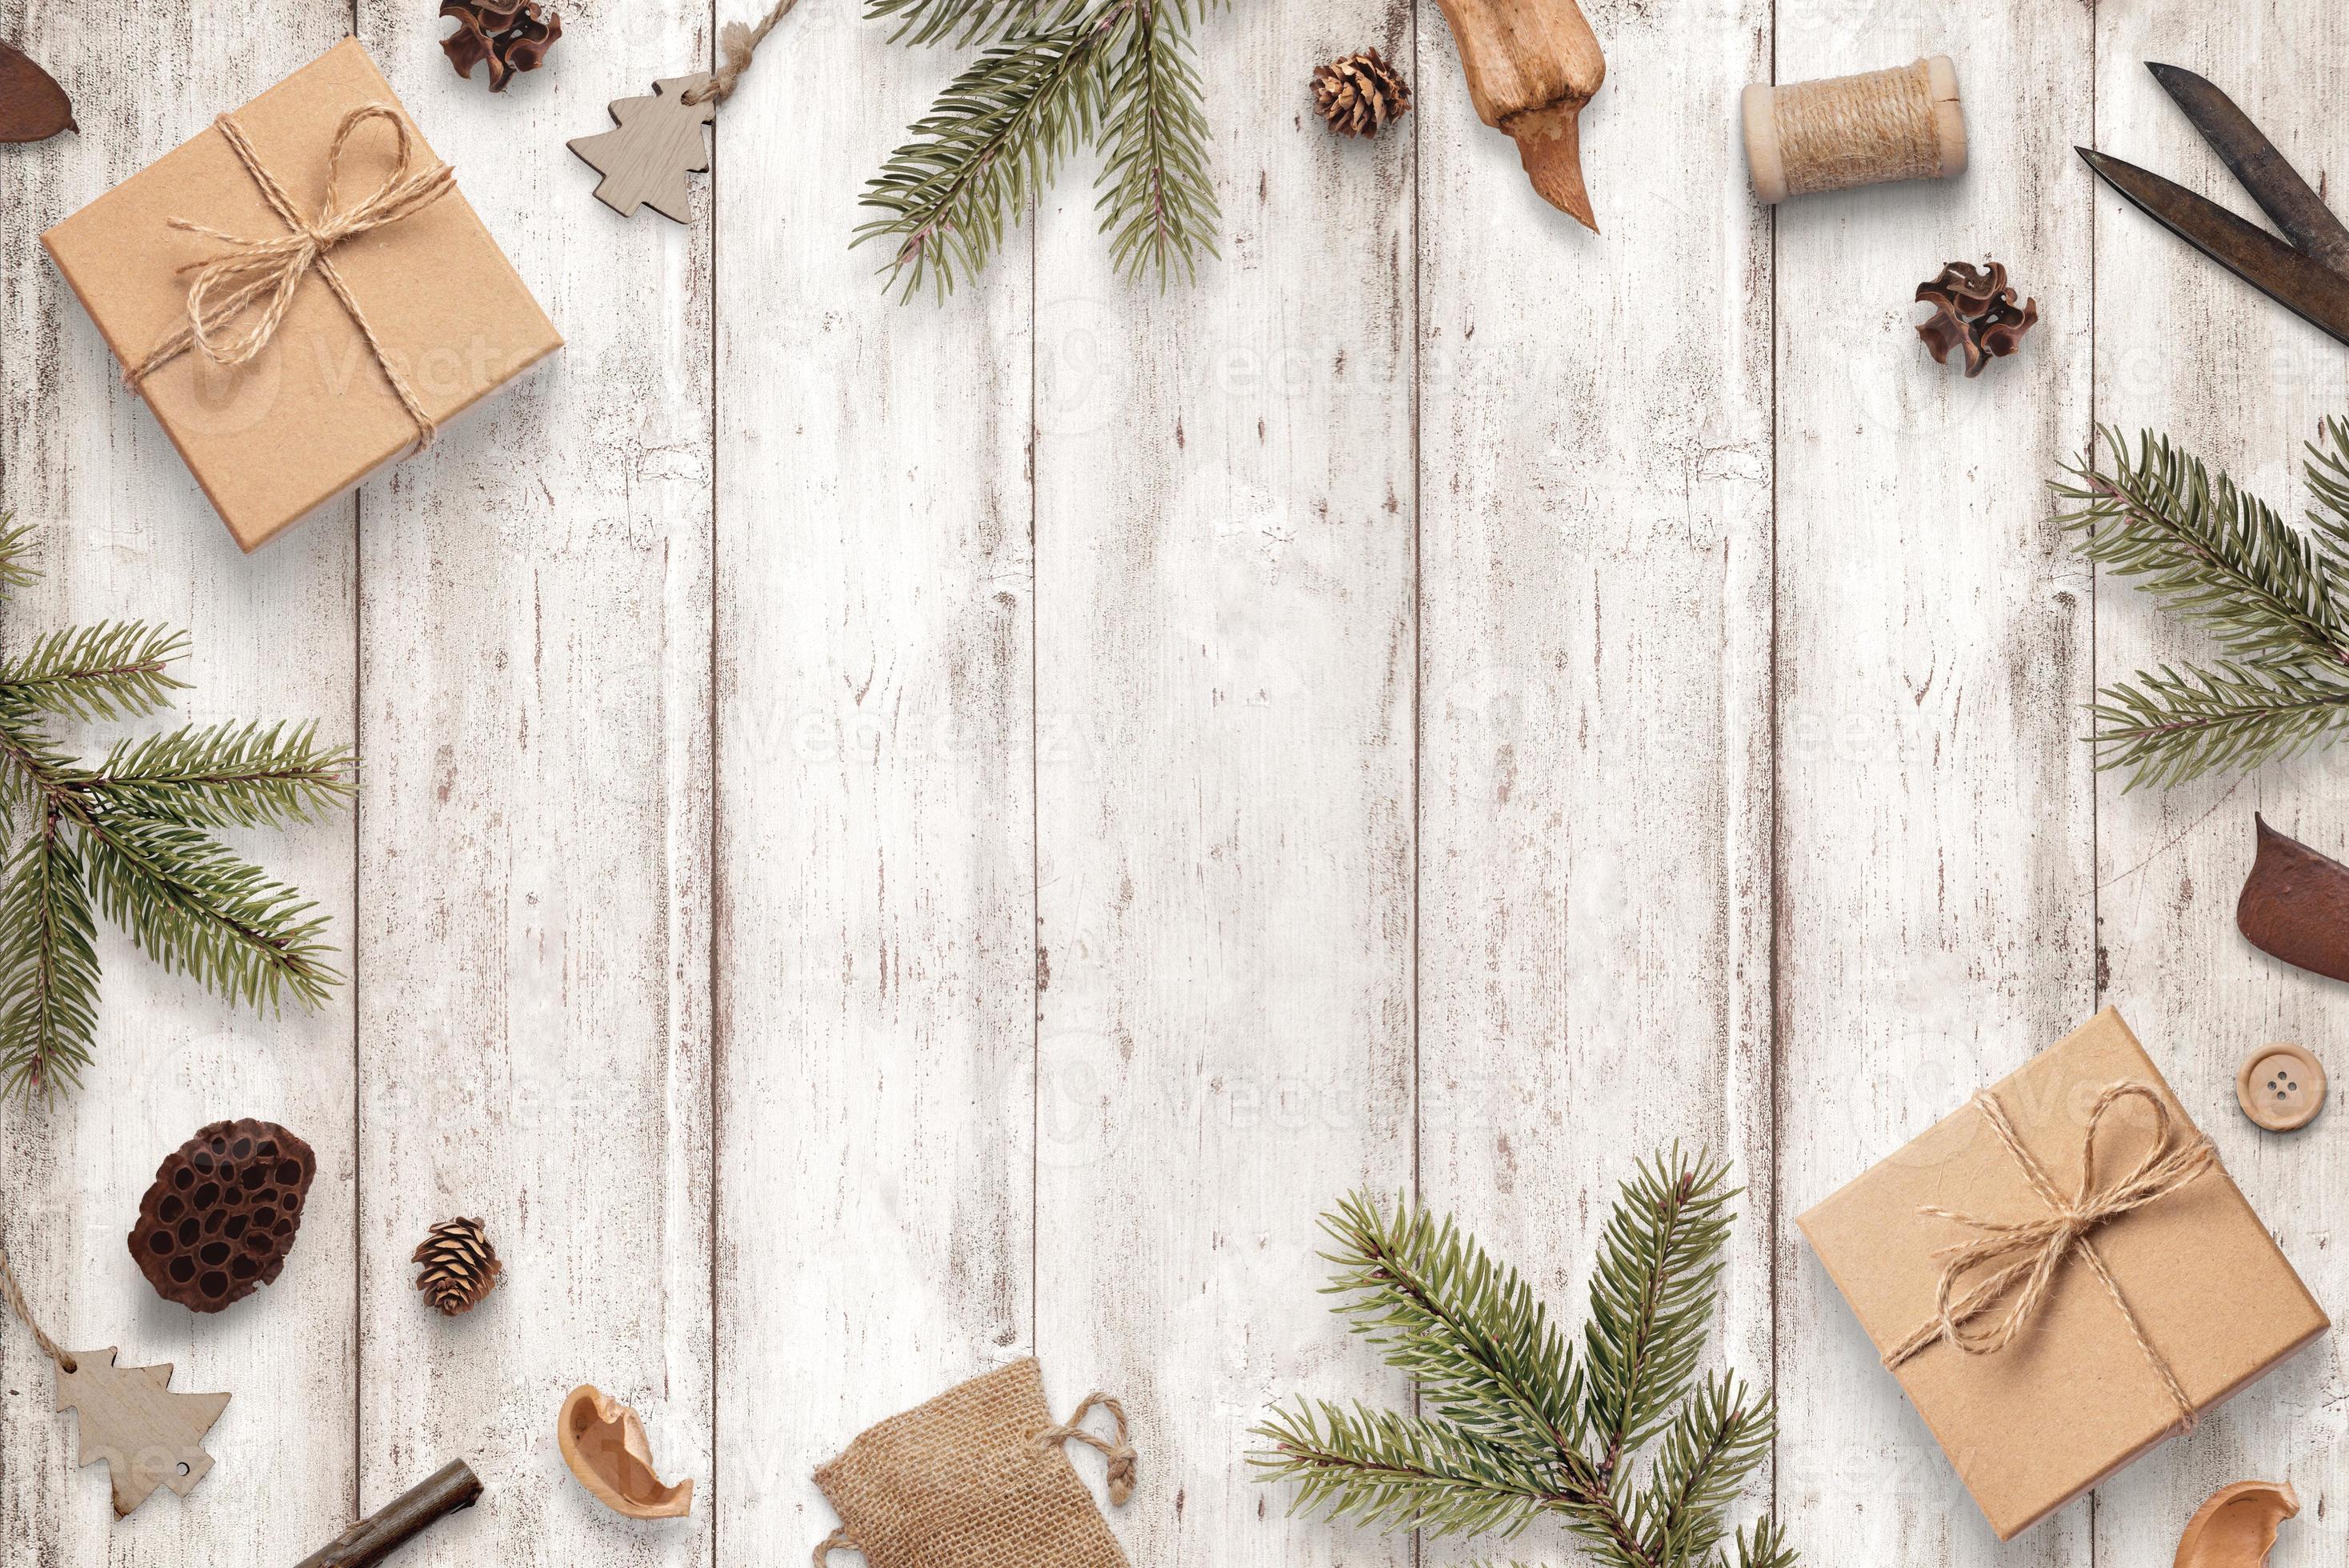 Rustic Christmas composition on white wooden Top view, flat lay scene with copy space in middle 3850216 Stock Photo at Vecteezy